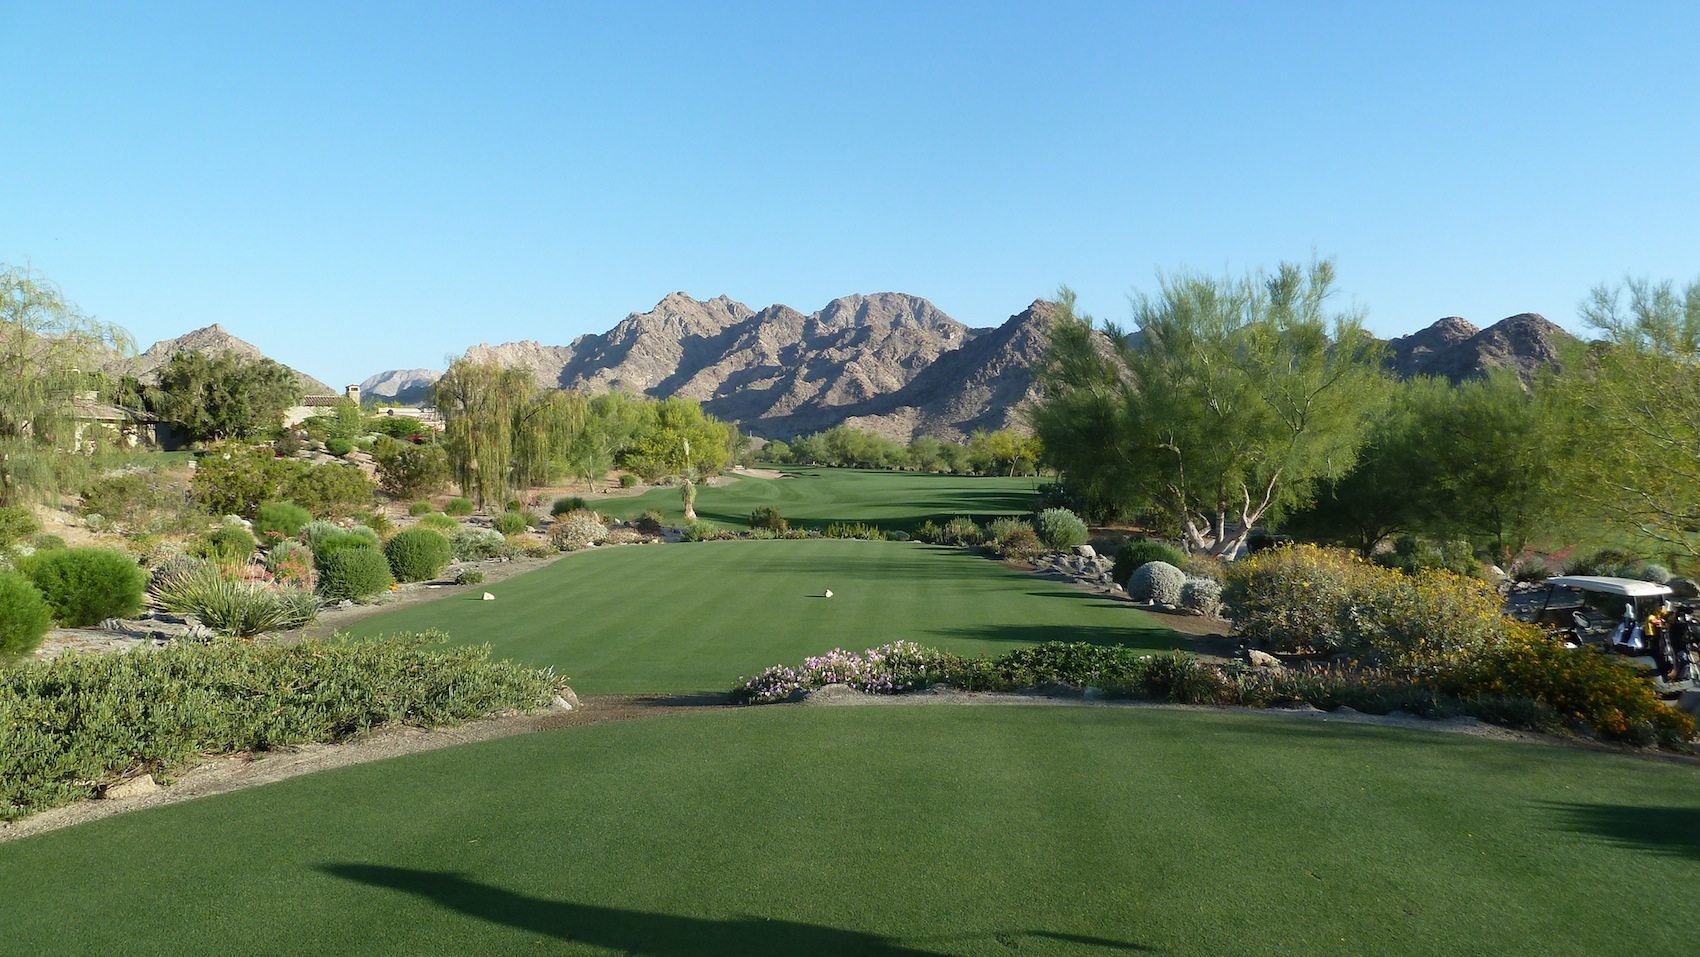 8 of the 'Best Golf Courses in California' are in the Coachella Valley